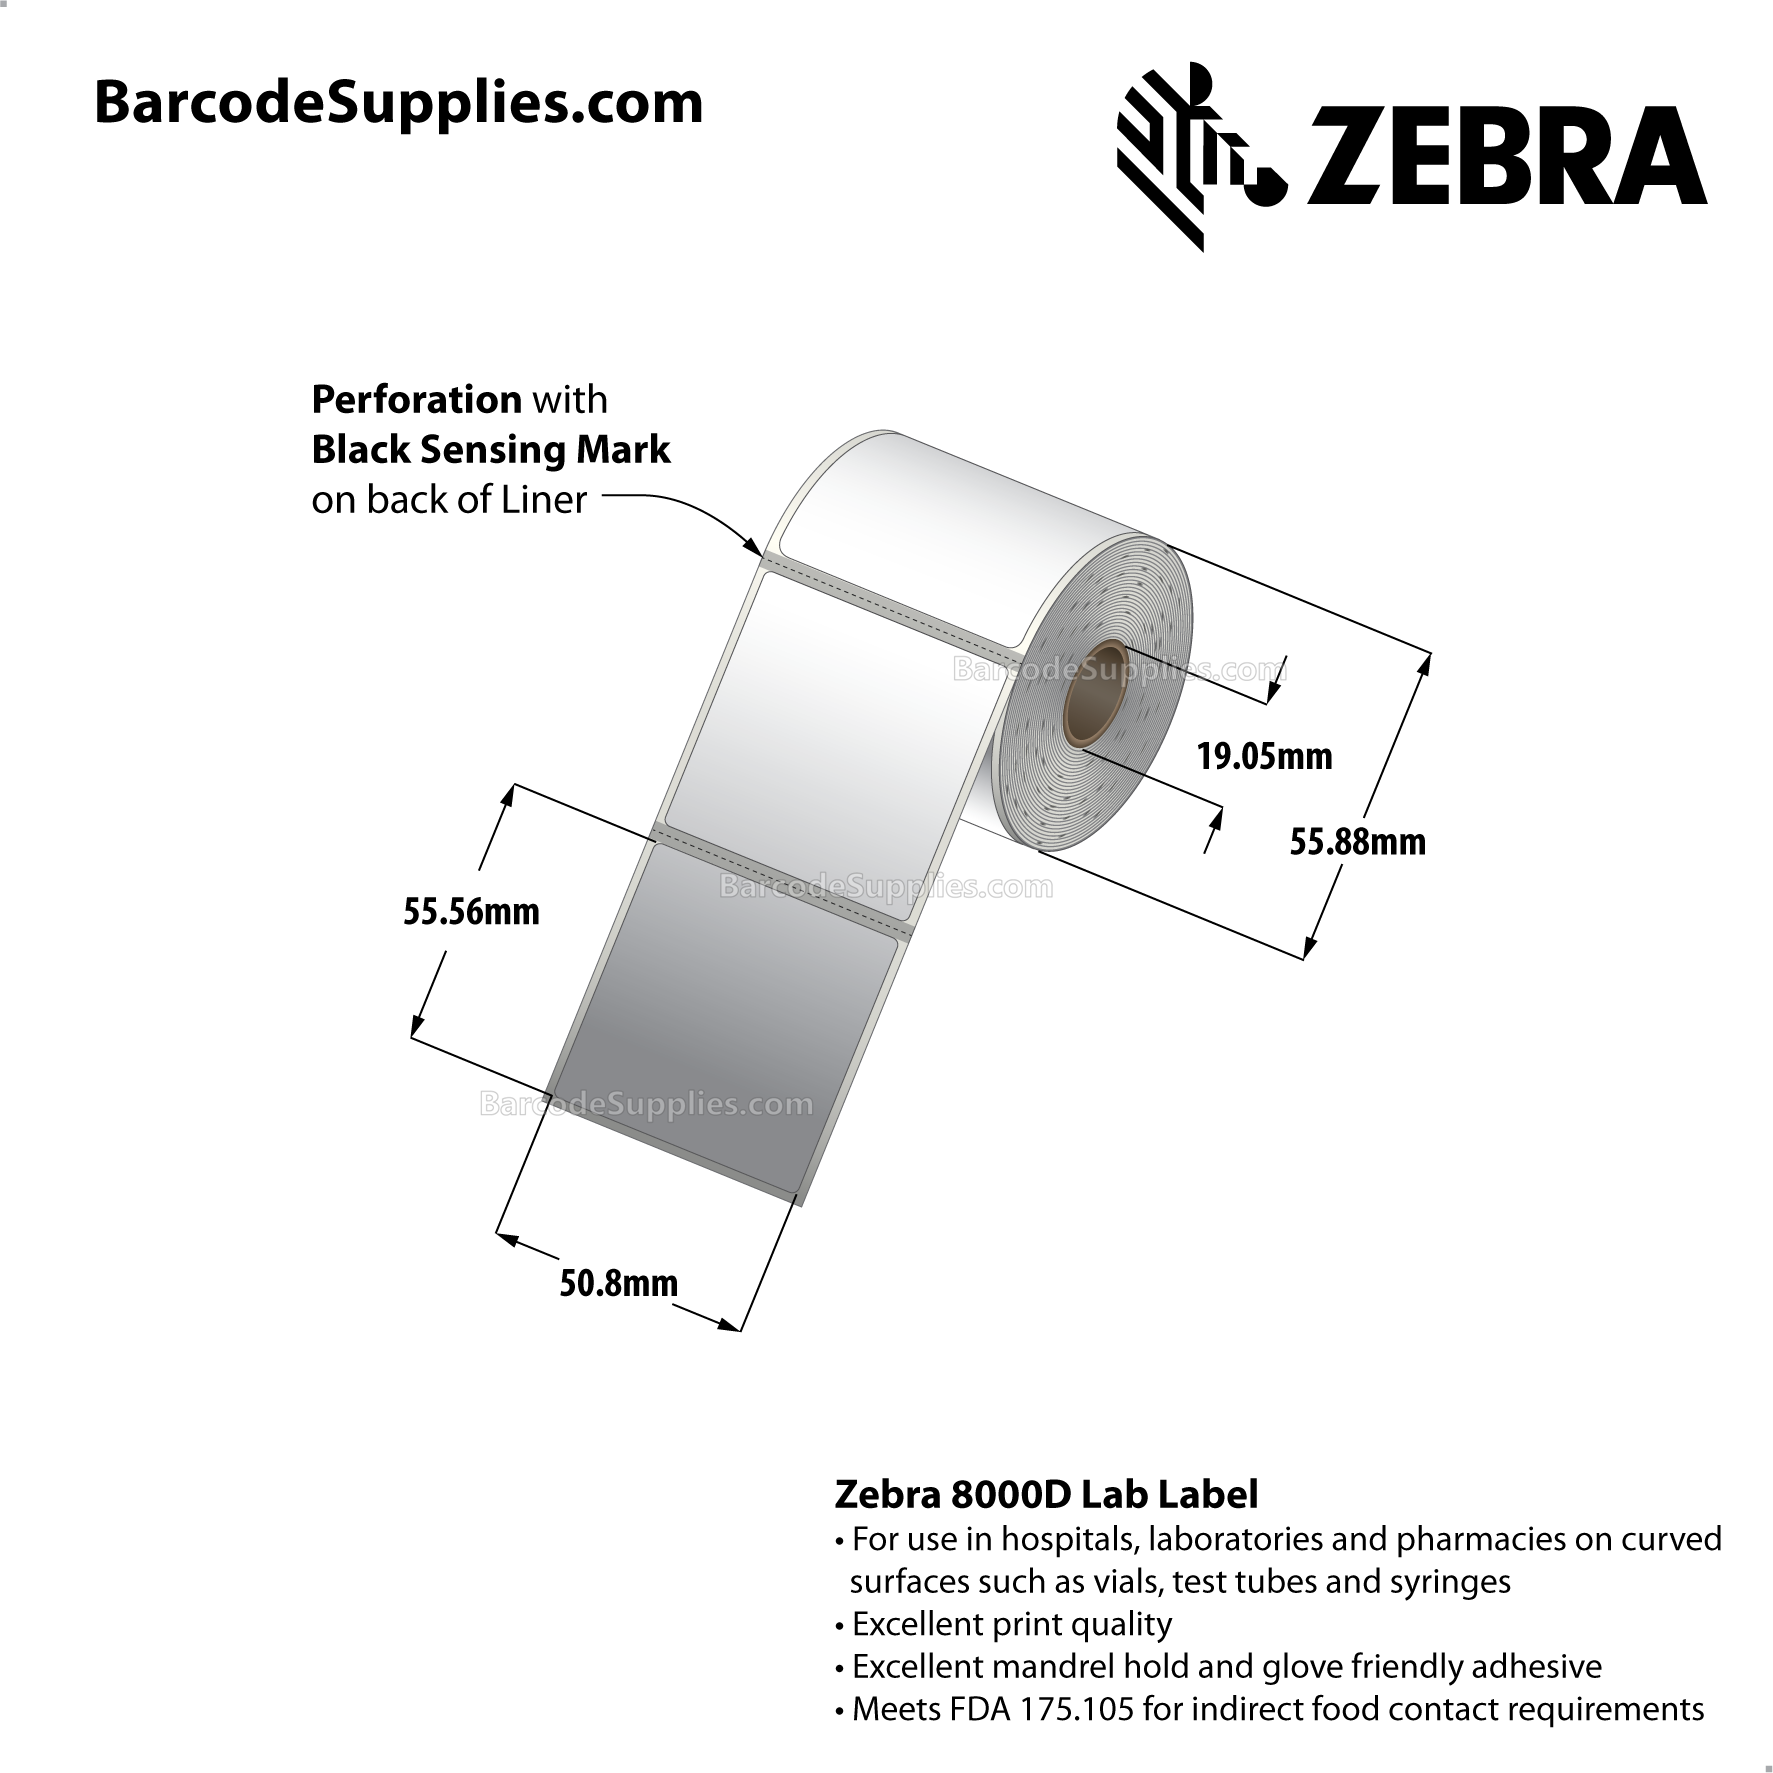 2 x 2.1875 Direct Thermal White 8000D Lab Labels With High-tack Adhesive - Perforated - 200 Labels Per Roll - Carton Of 12 Rolls - 2400 Labels Total - MPN: 10015775